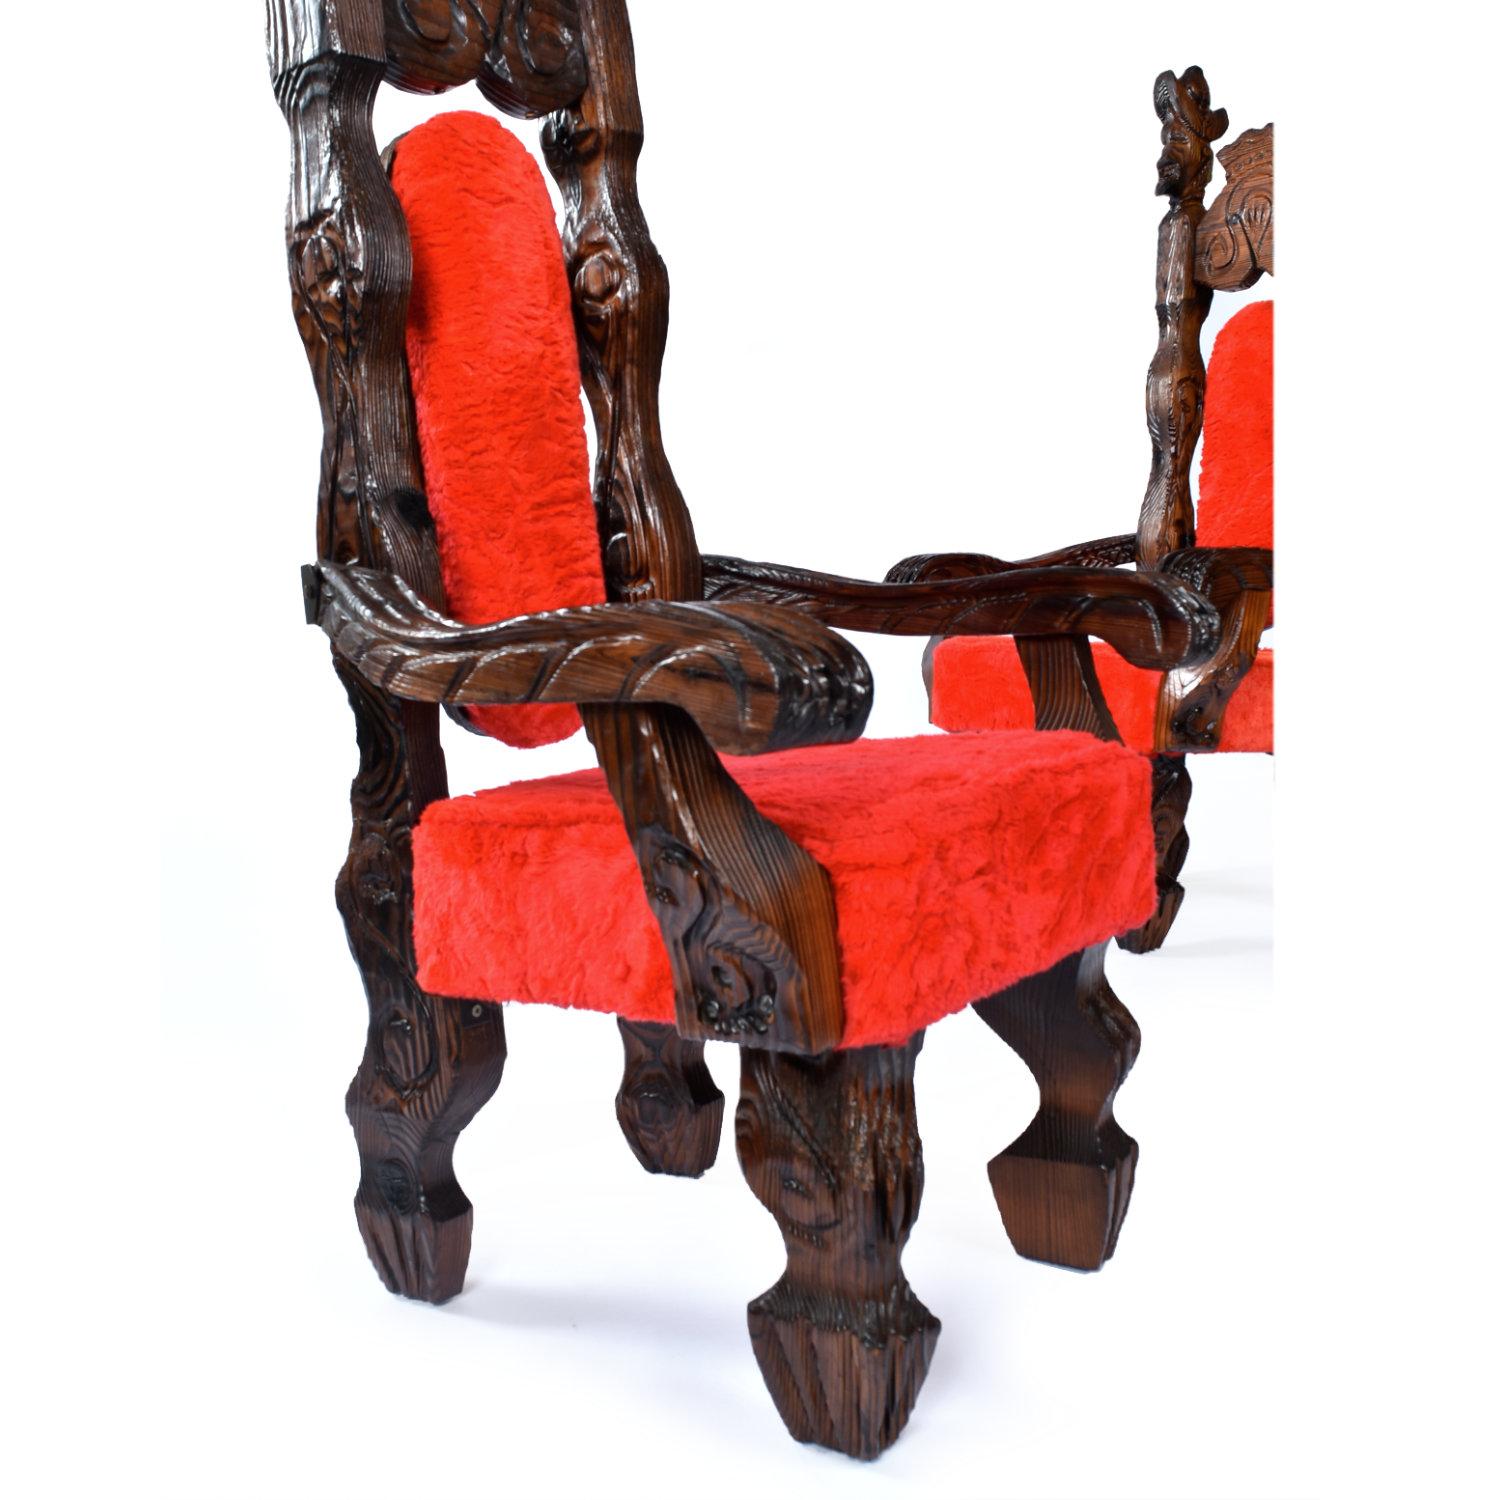 '2' Restored Vintage Witco Conquistador Tiki Throne Chairs in Original Red Fur For Sale 2